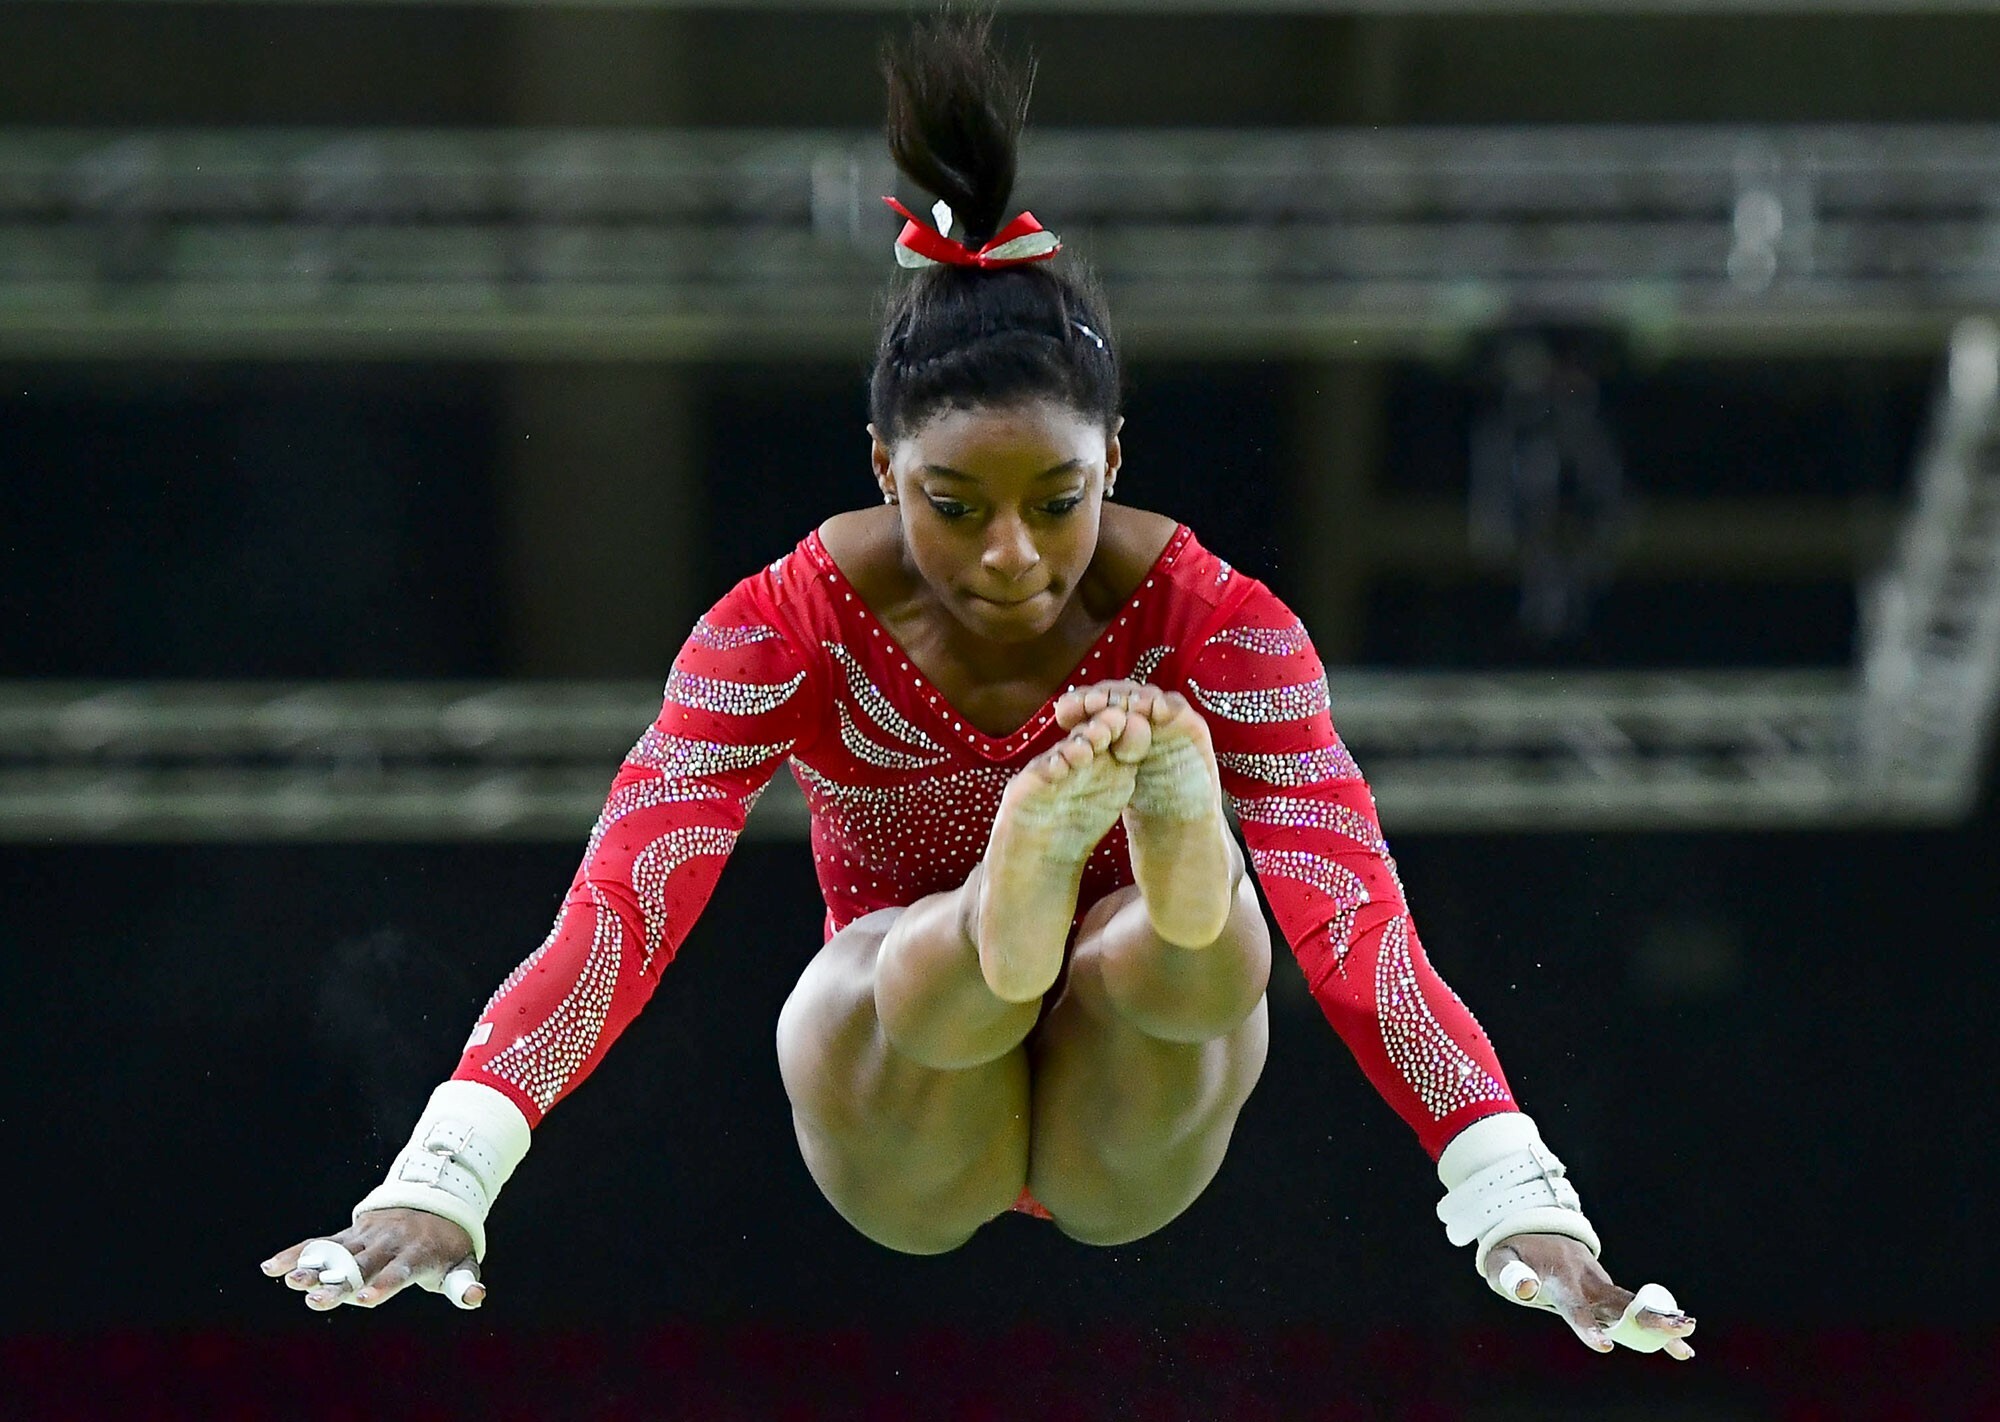 Simone Biles: She won her second consecutive world all-around title at the 2014 World Artistic Gymnastics Championships. 2000x1430 HD Background.